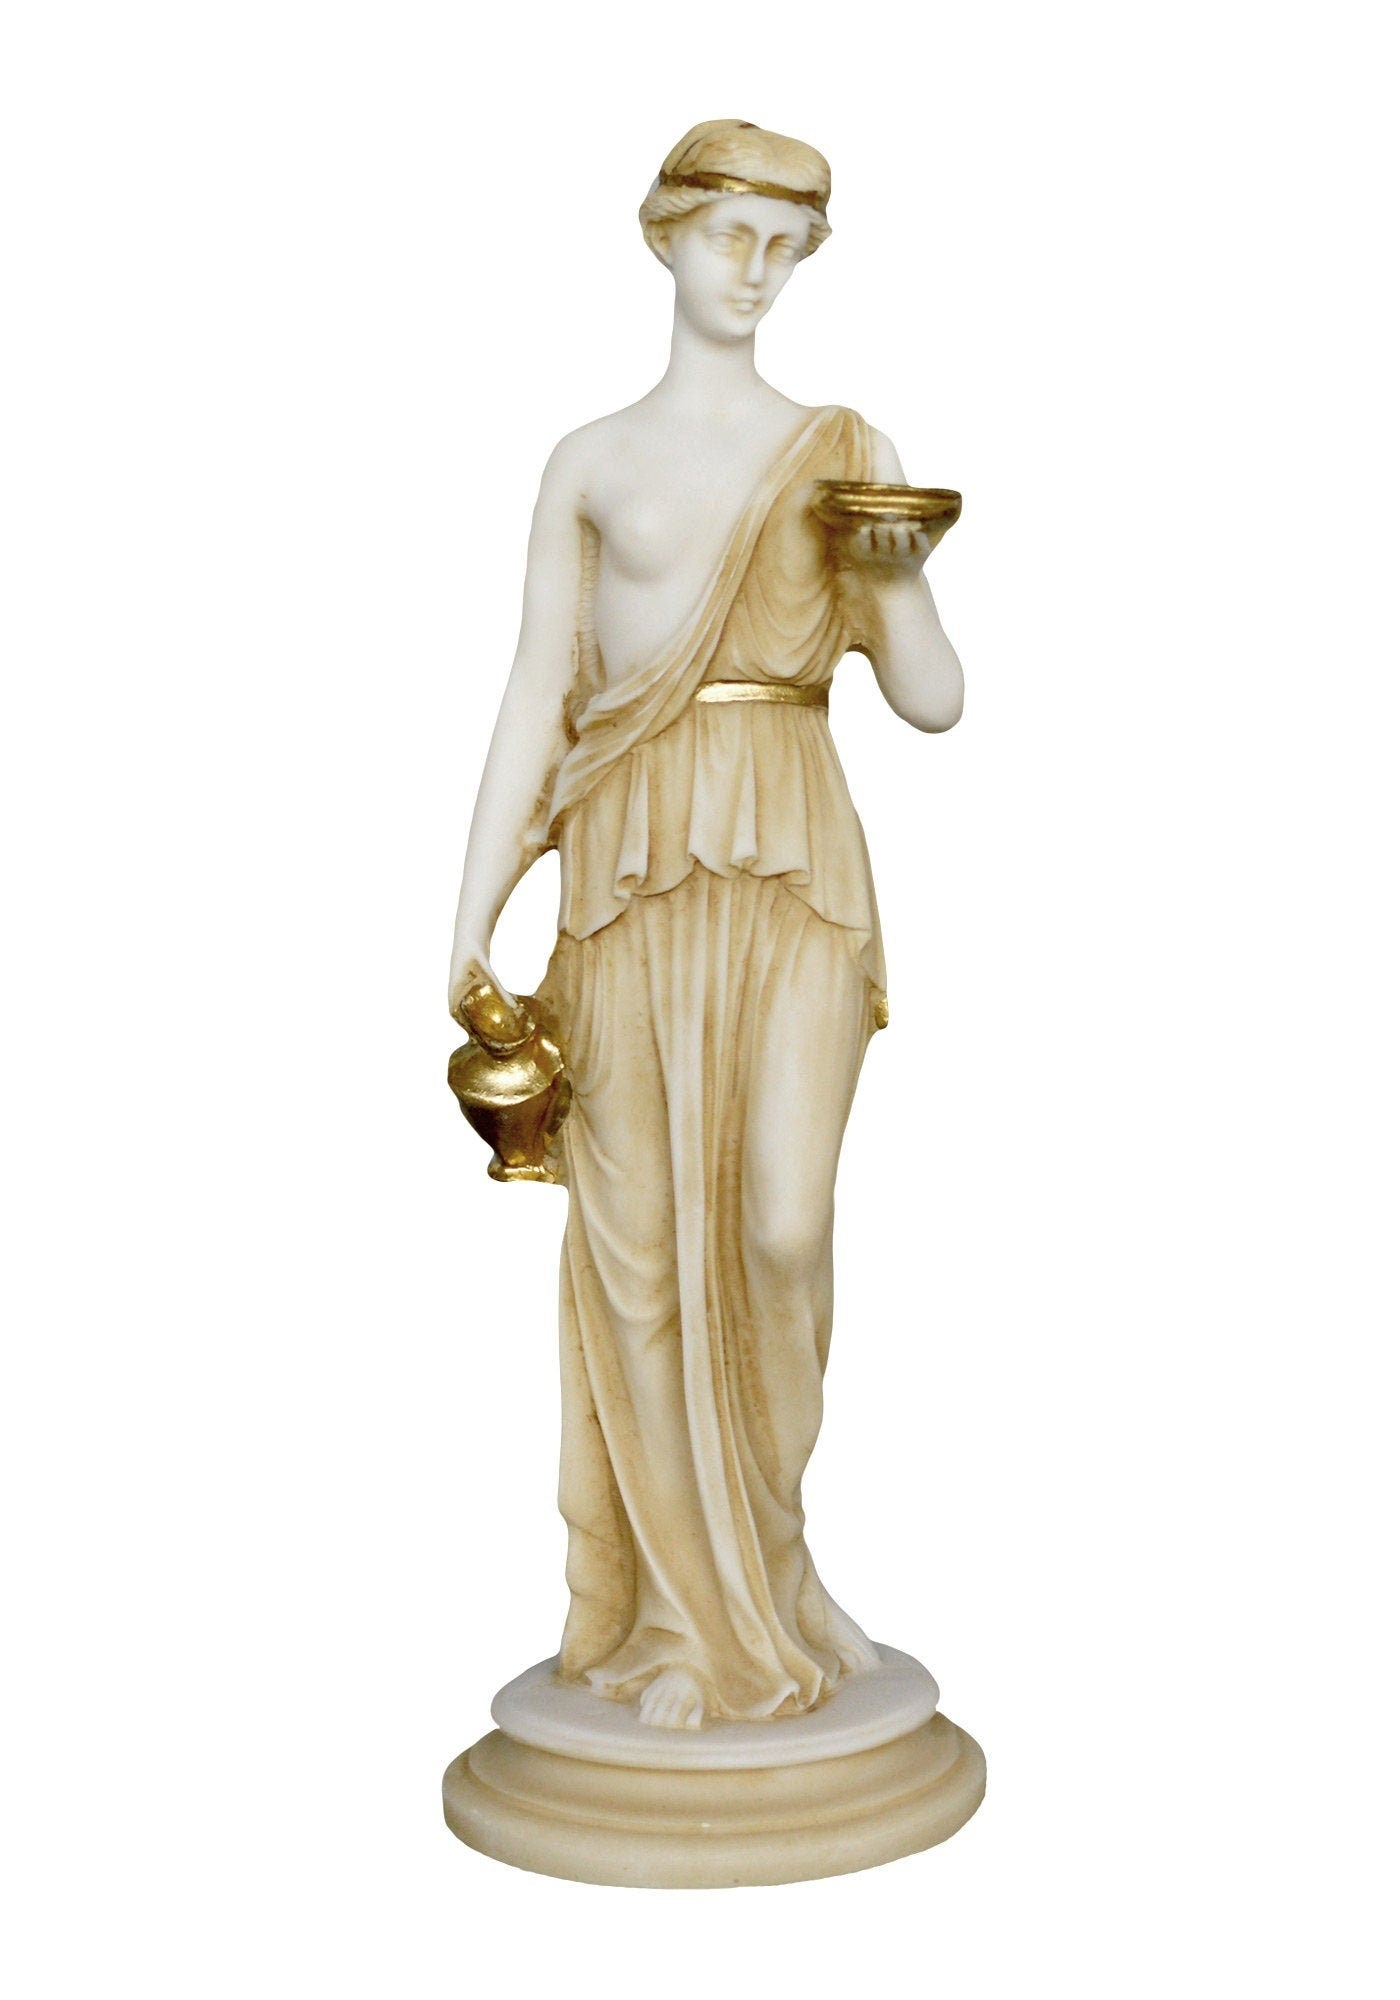 Hebe Juventas - Greek Roman Goddess of Youth or the Prime of Life - Cupbearer of the Gods - Nectar and Ambrosia - Aged Alabaster Statue